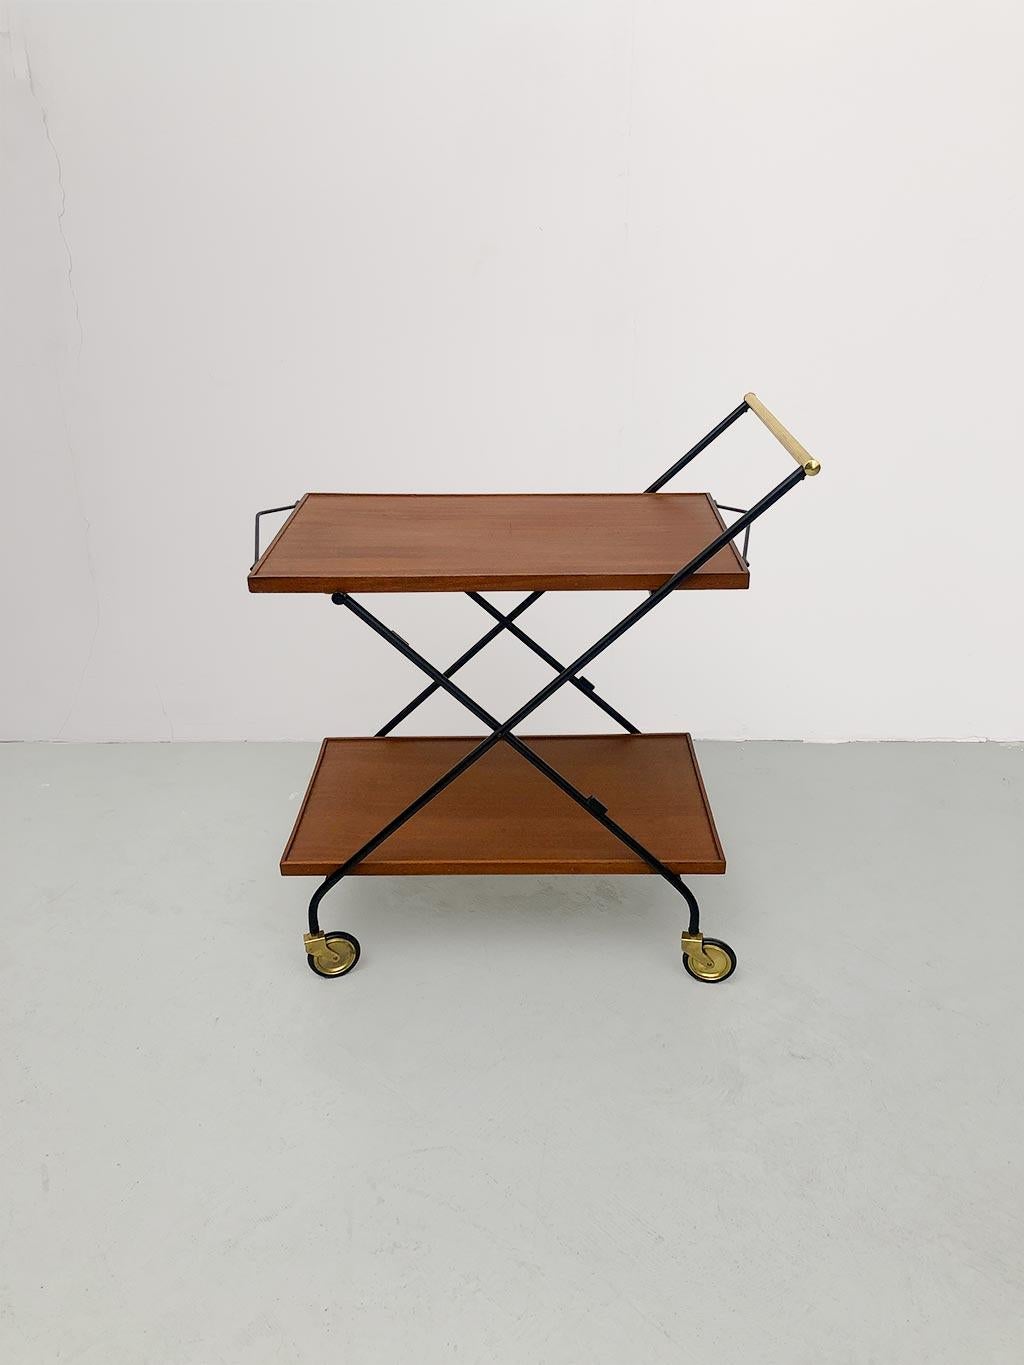 1960s Italian food bar cart. Black iron frame, walnut shelves and brass details. High shelf that can be used as a tray. Foldable. Natural signs of aging due to use. Condition good.